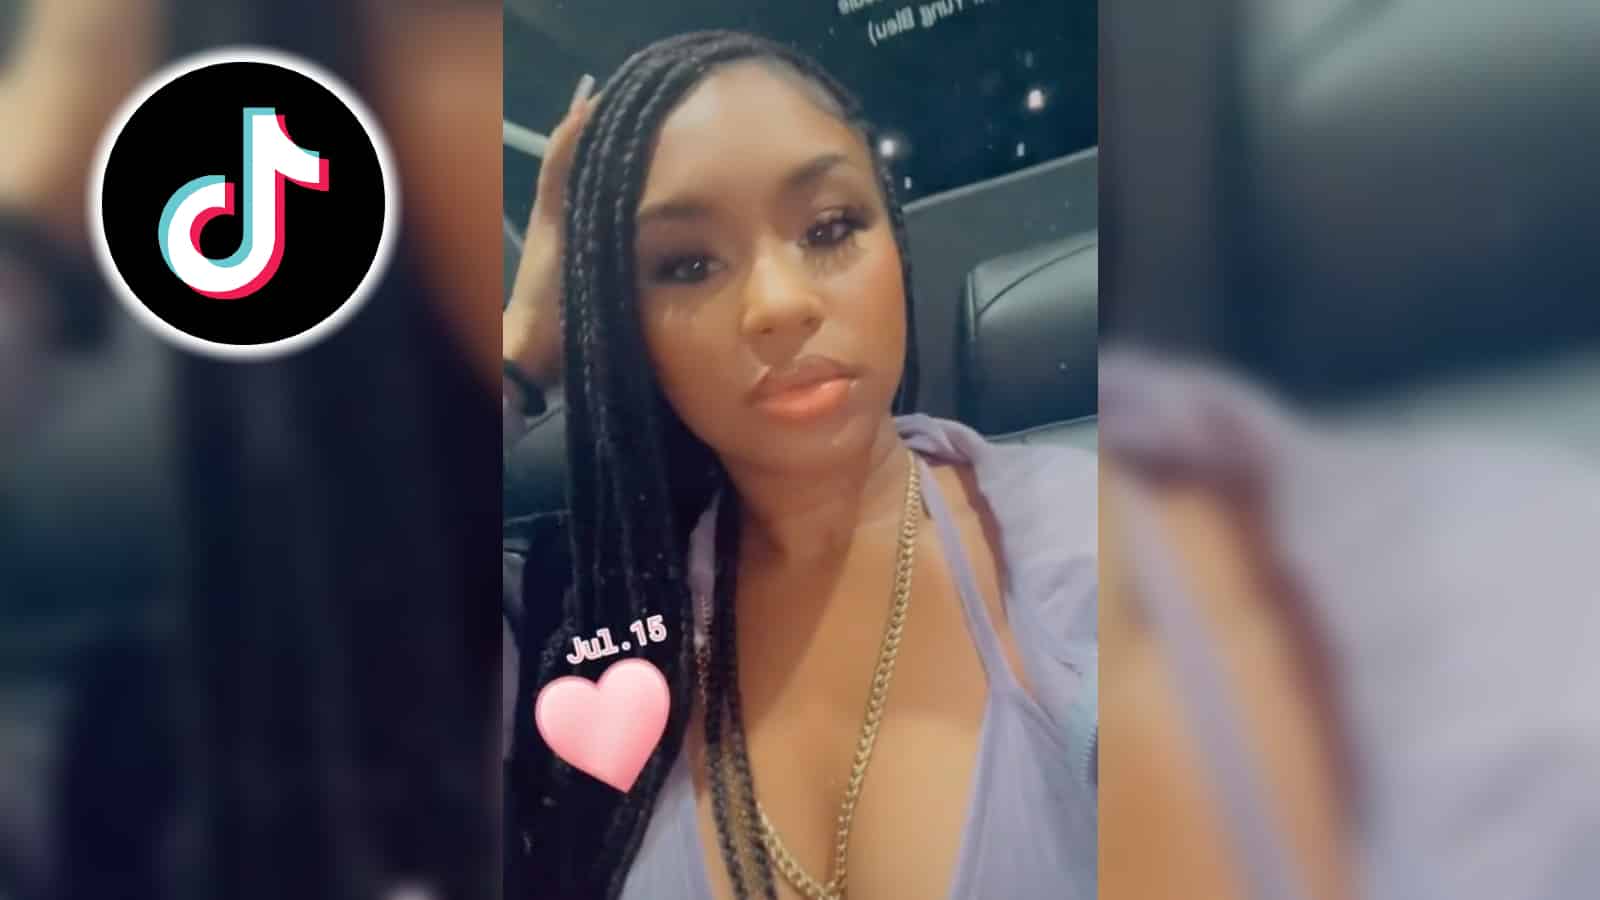 Lucydasshh Leaked Cheating Viral Video: Who Is Lucydasshh on TikTok?